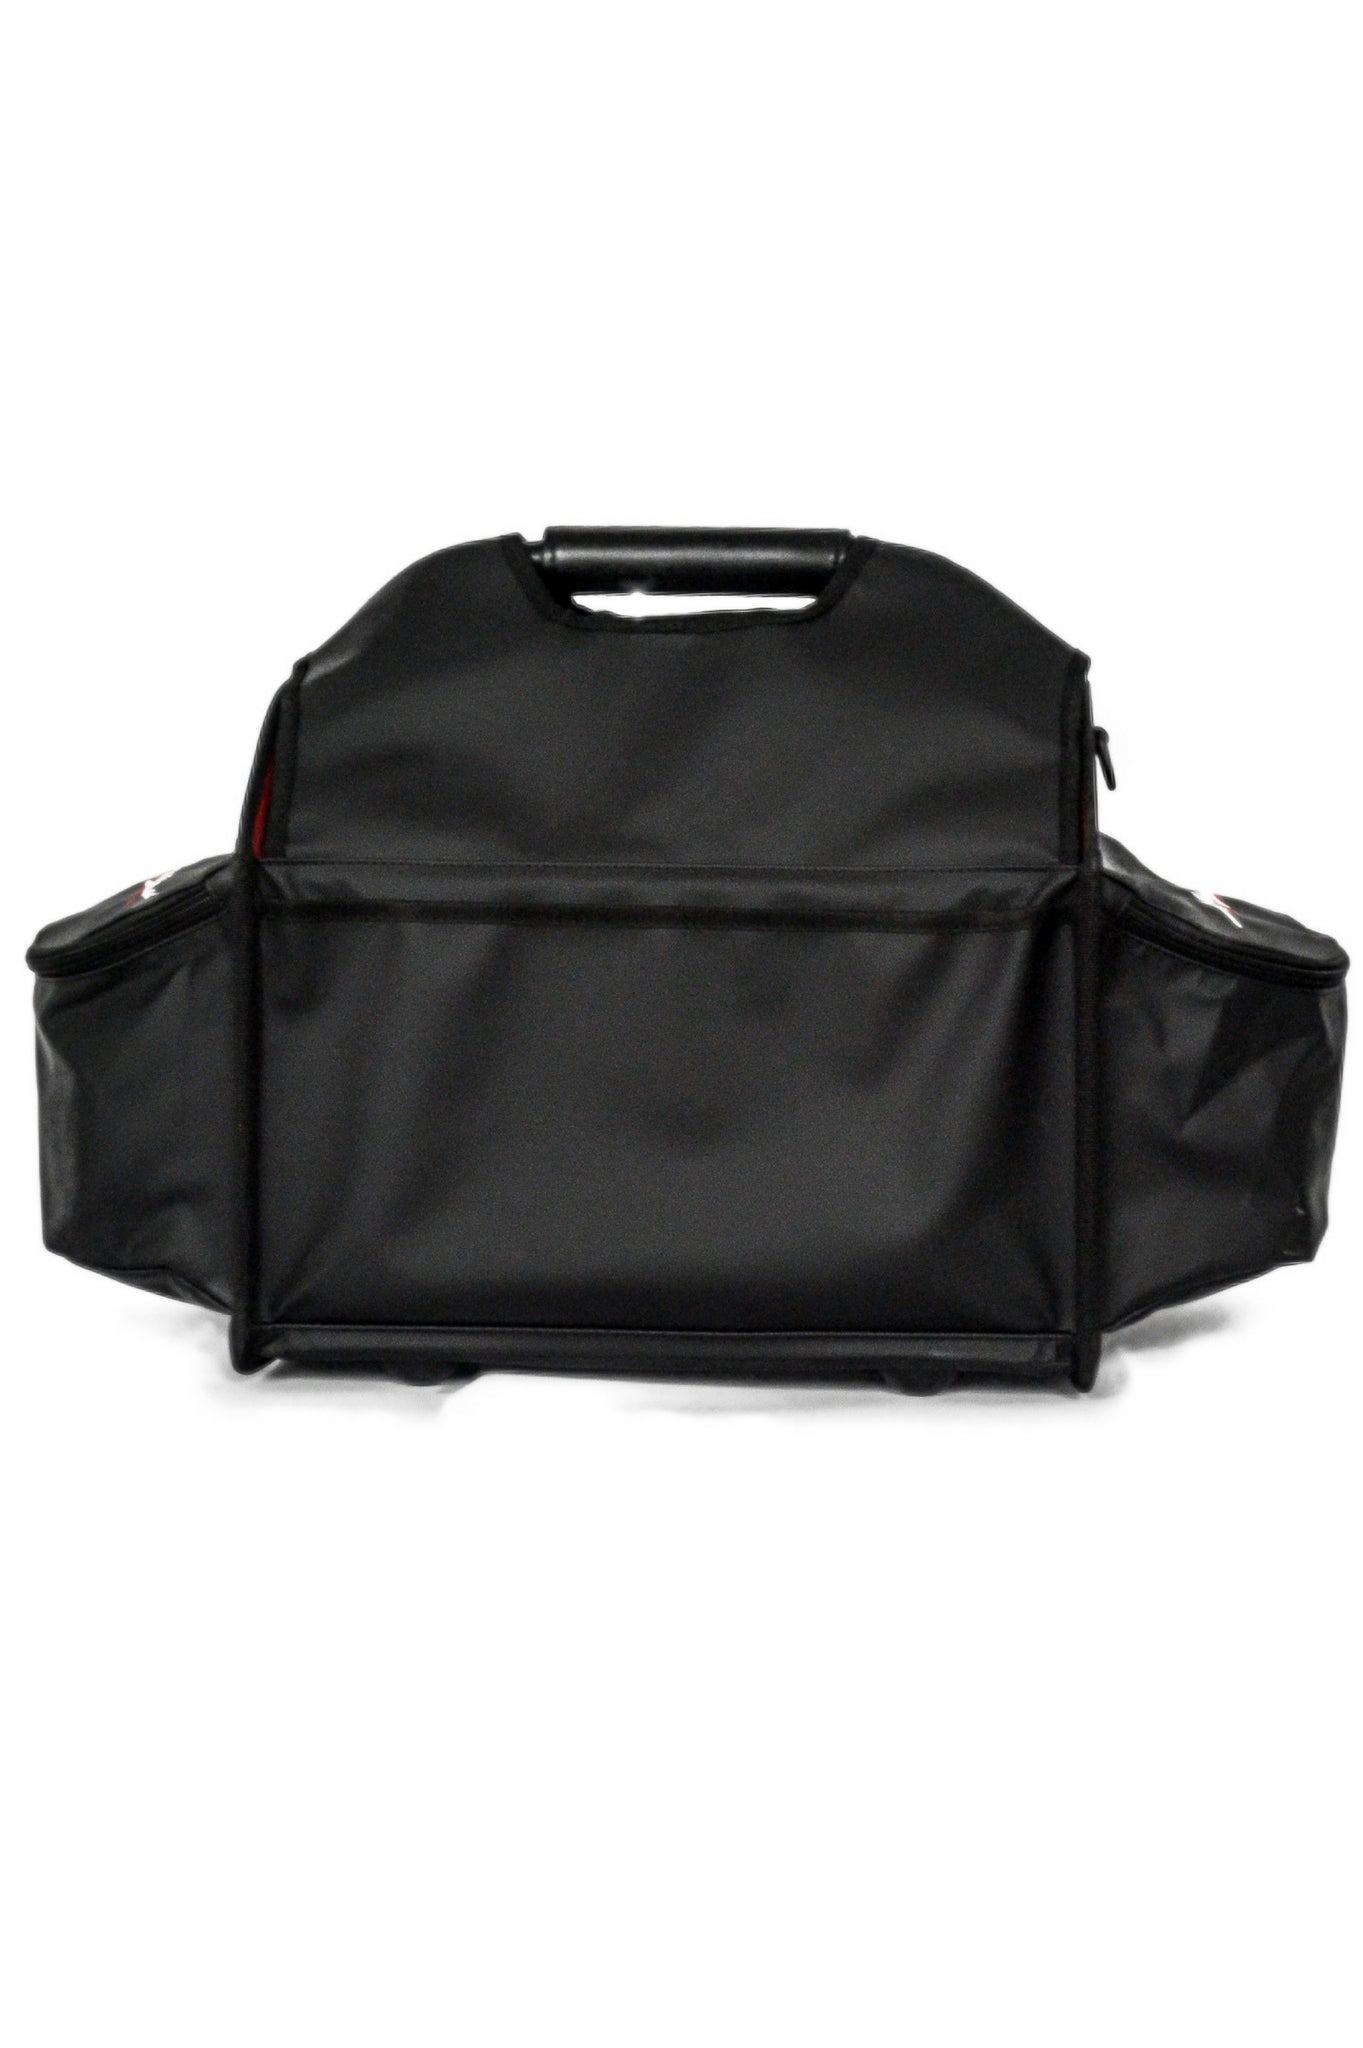 Crew Detailing Bag  The Perfect Home For All Your Detailing Products